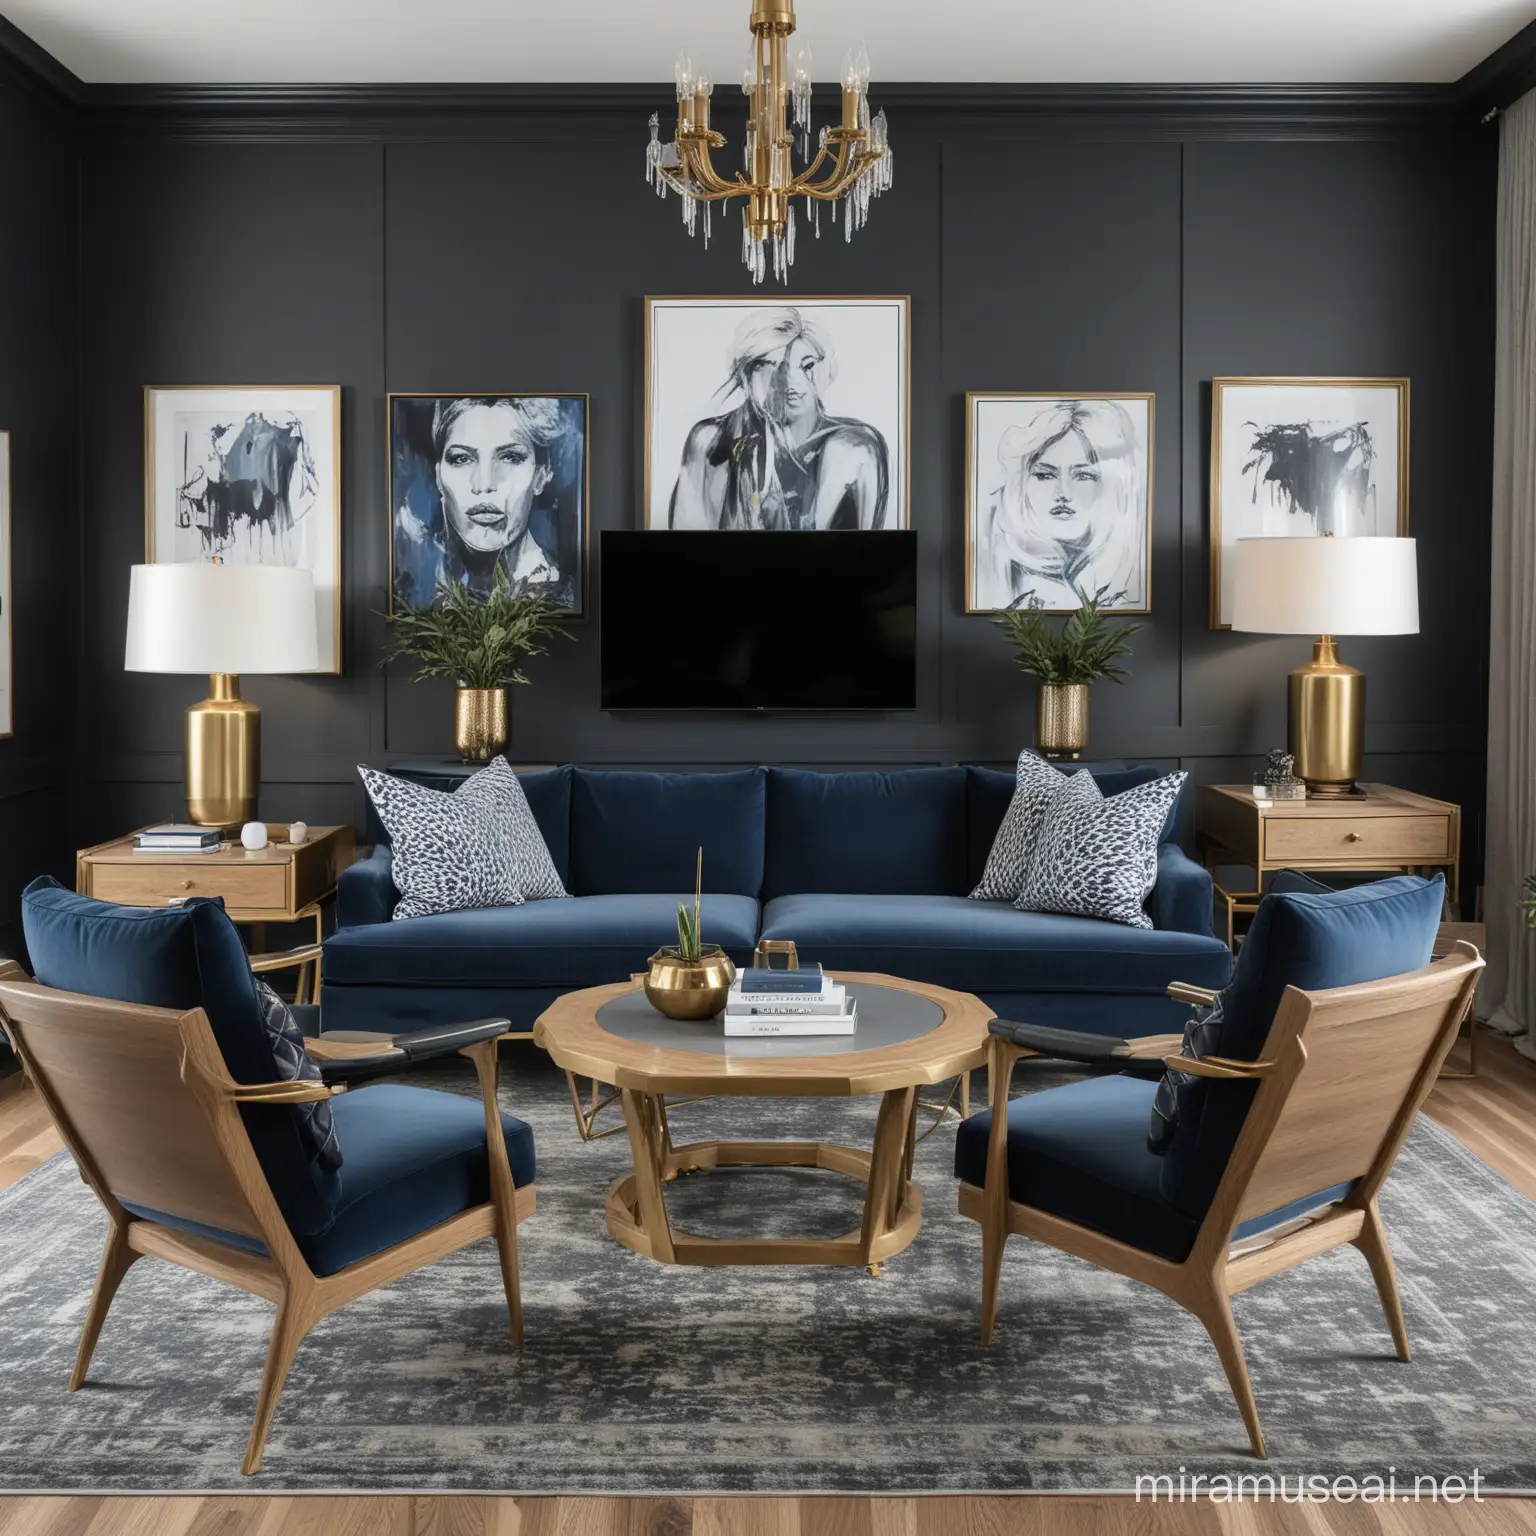 Home Office, manly style, art decor, moody, with white oak floors, dark walls, with 2 sofa arm chairs, tv on the wall, executive desk facing the wall, bold artwork, accents of brass and blue decor, modern scandi vibes